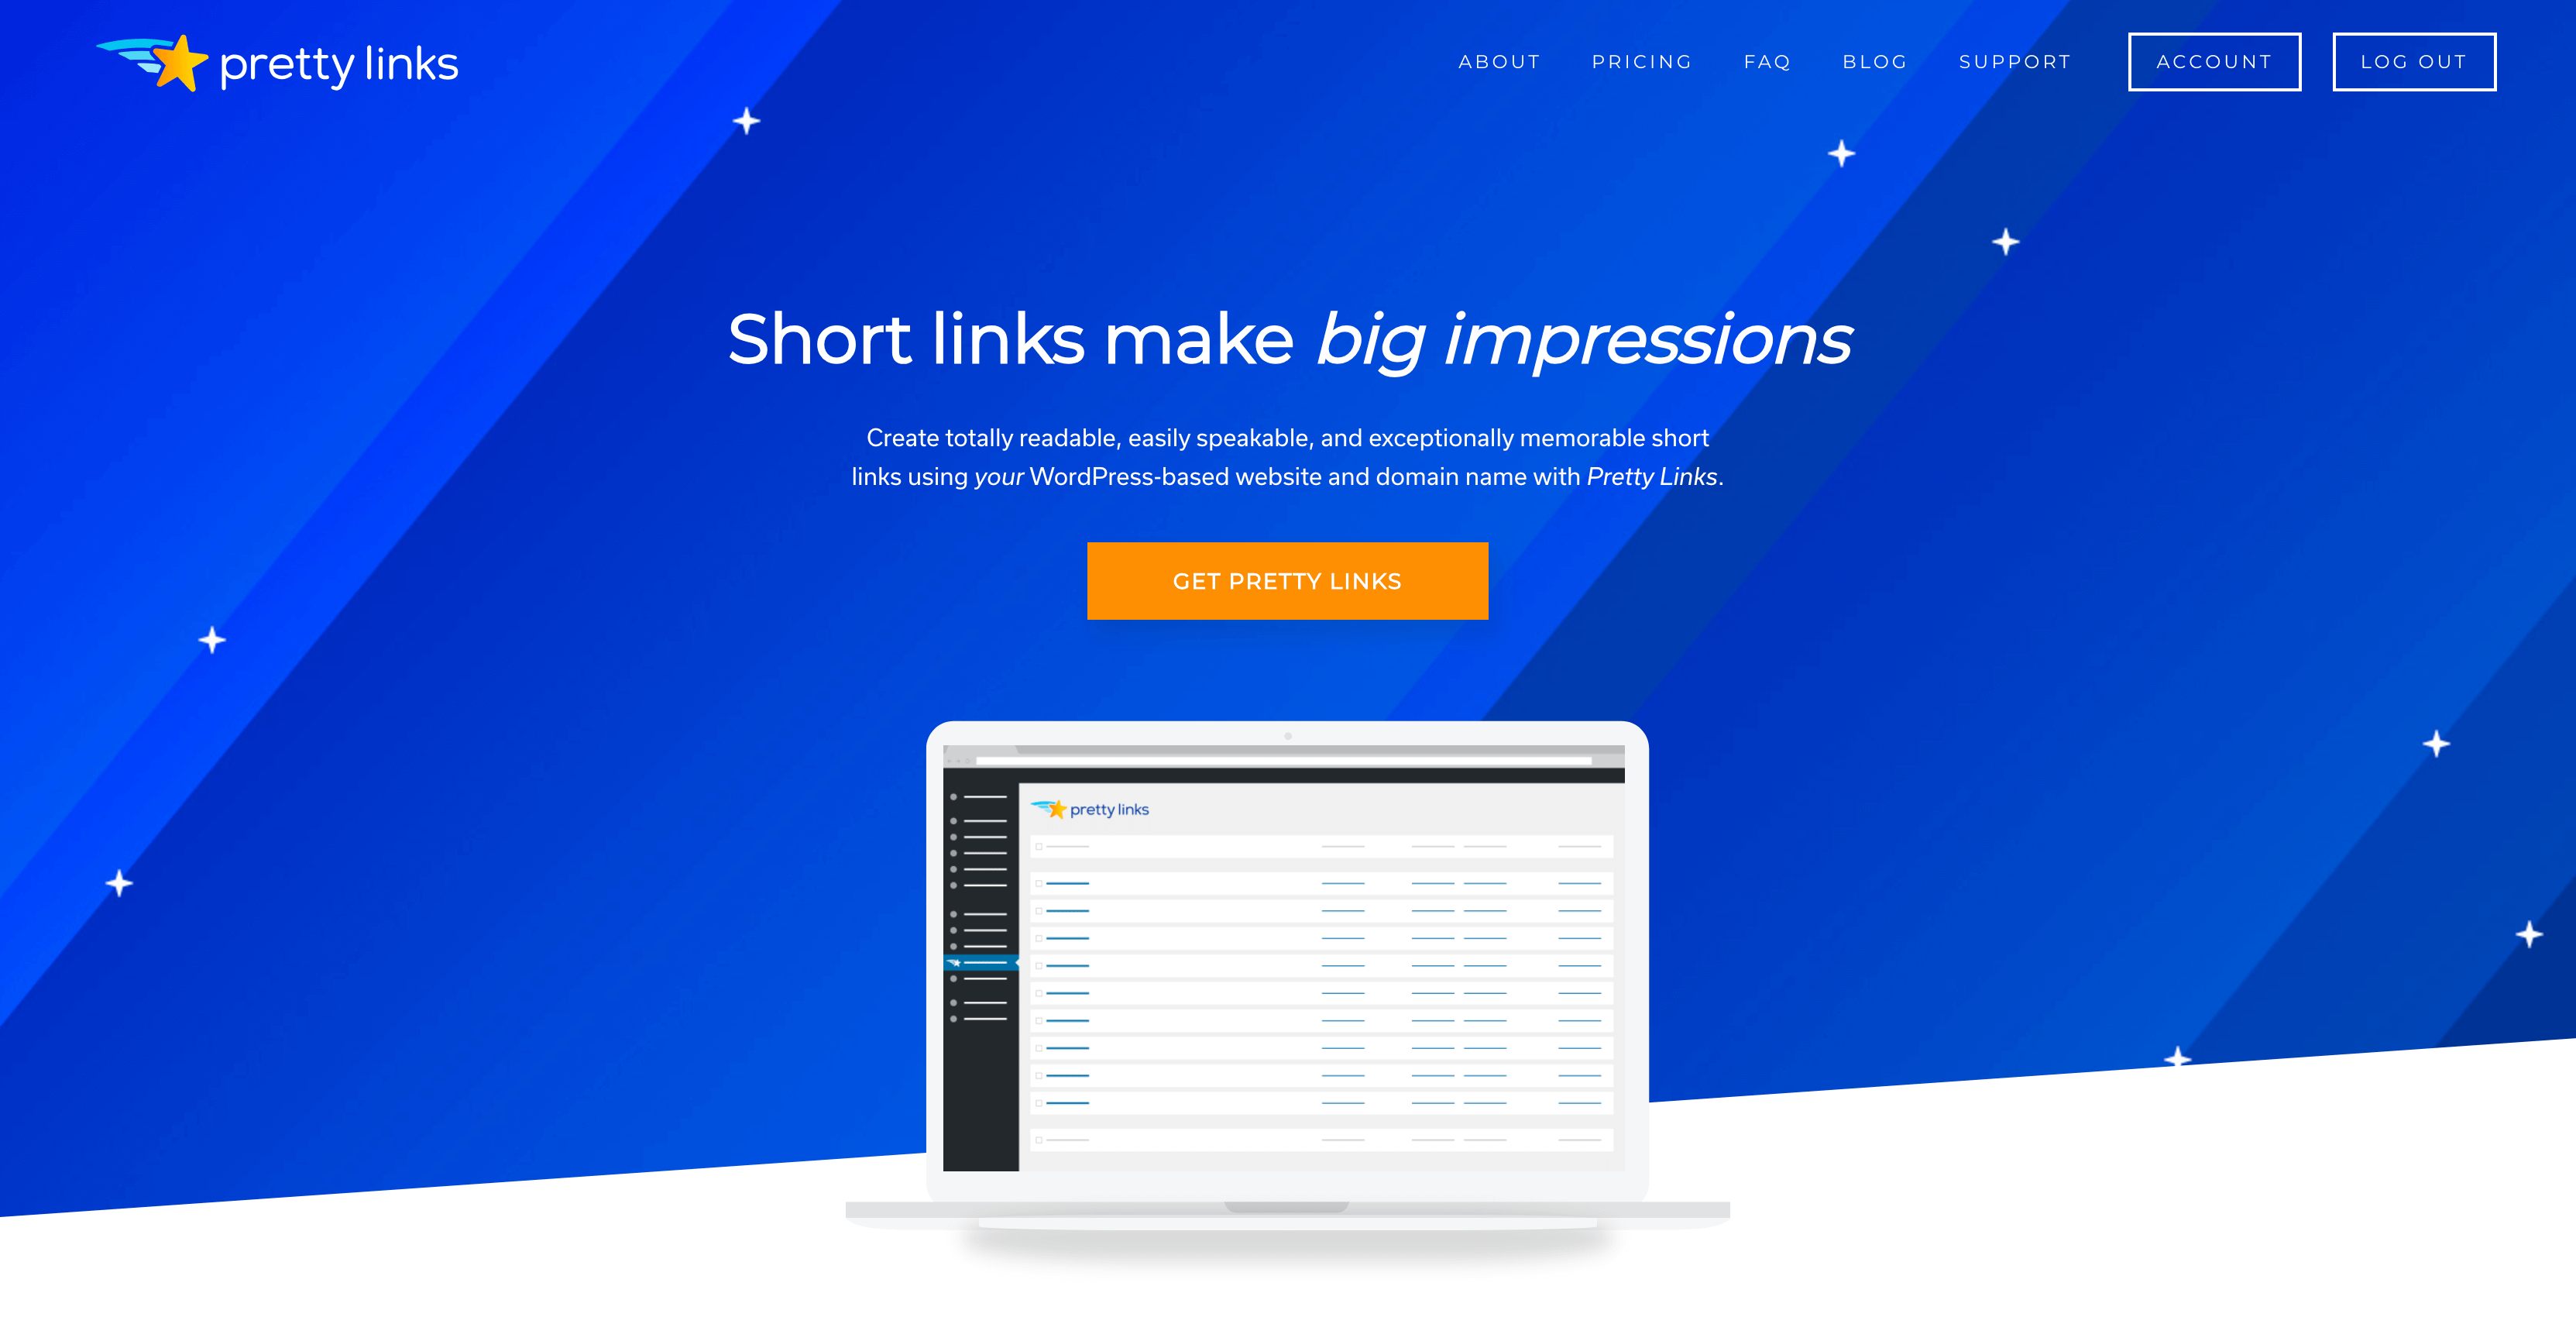 The homepage for the Pretty Links plugin.